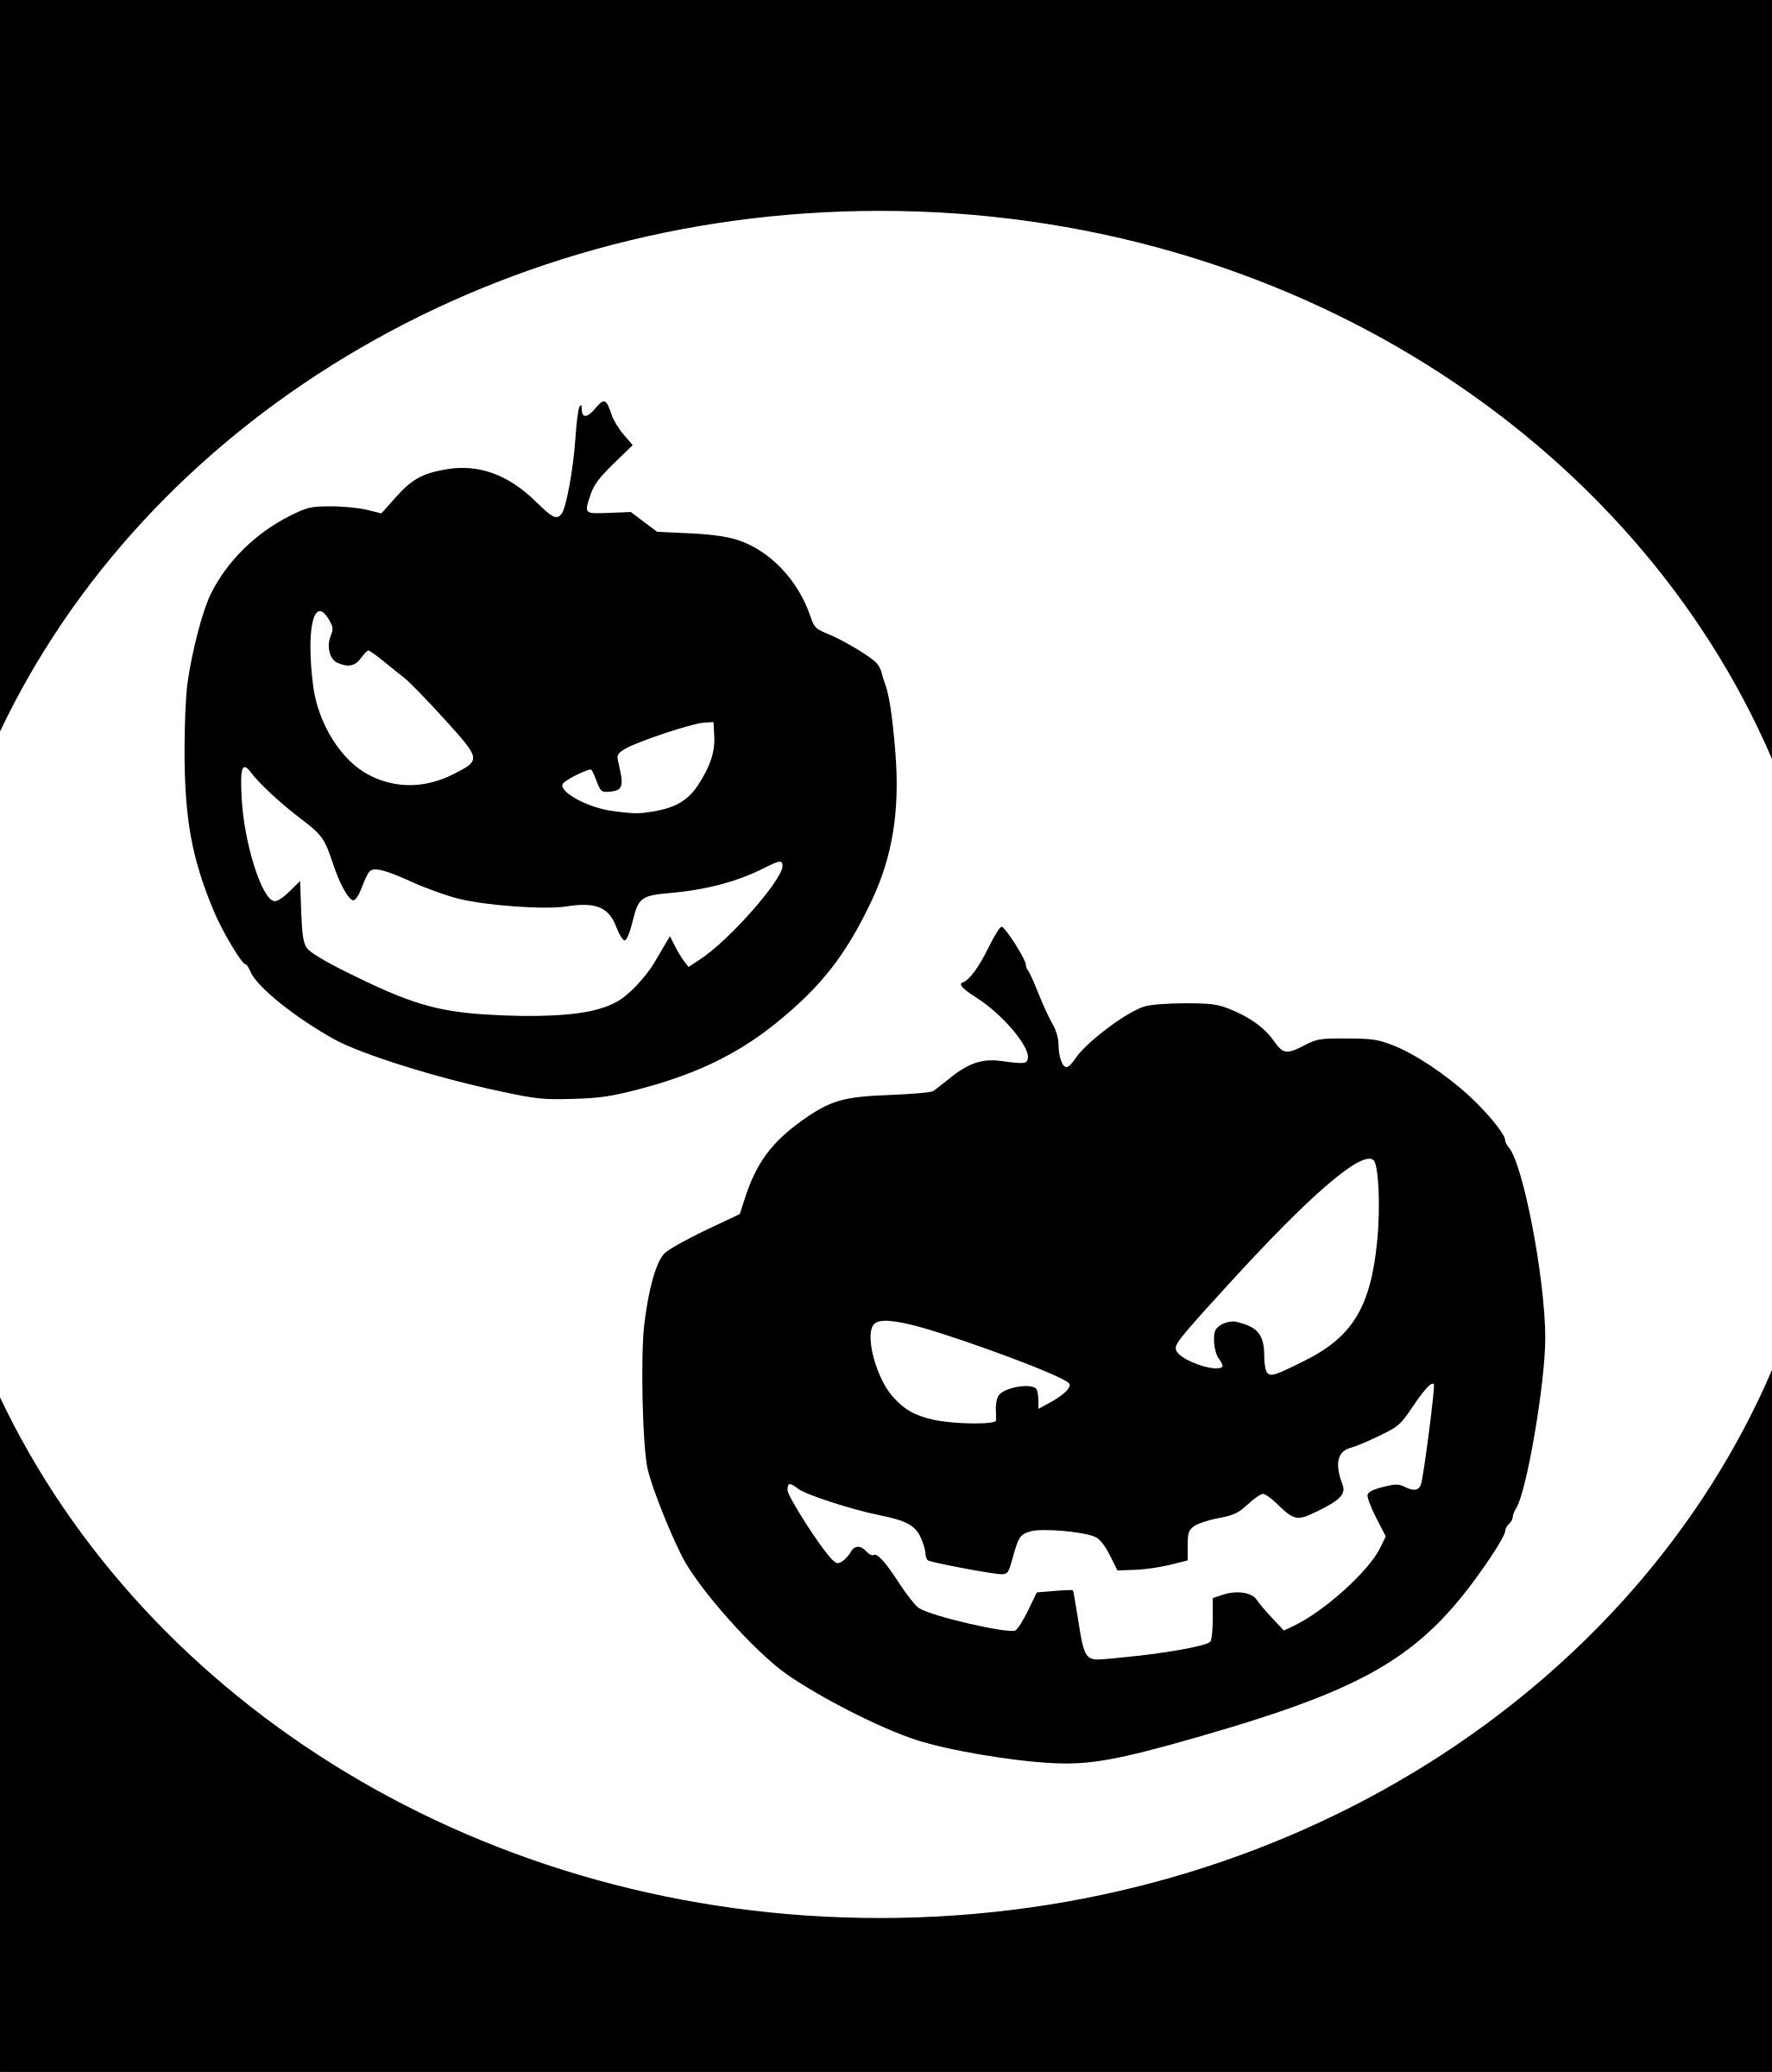 Halloween Black and White Logo - Black and white halloween pumpkin vector freeuse library - RR ...